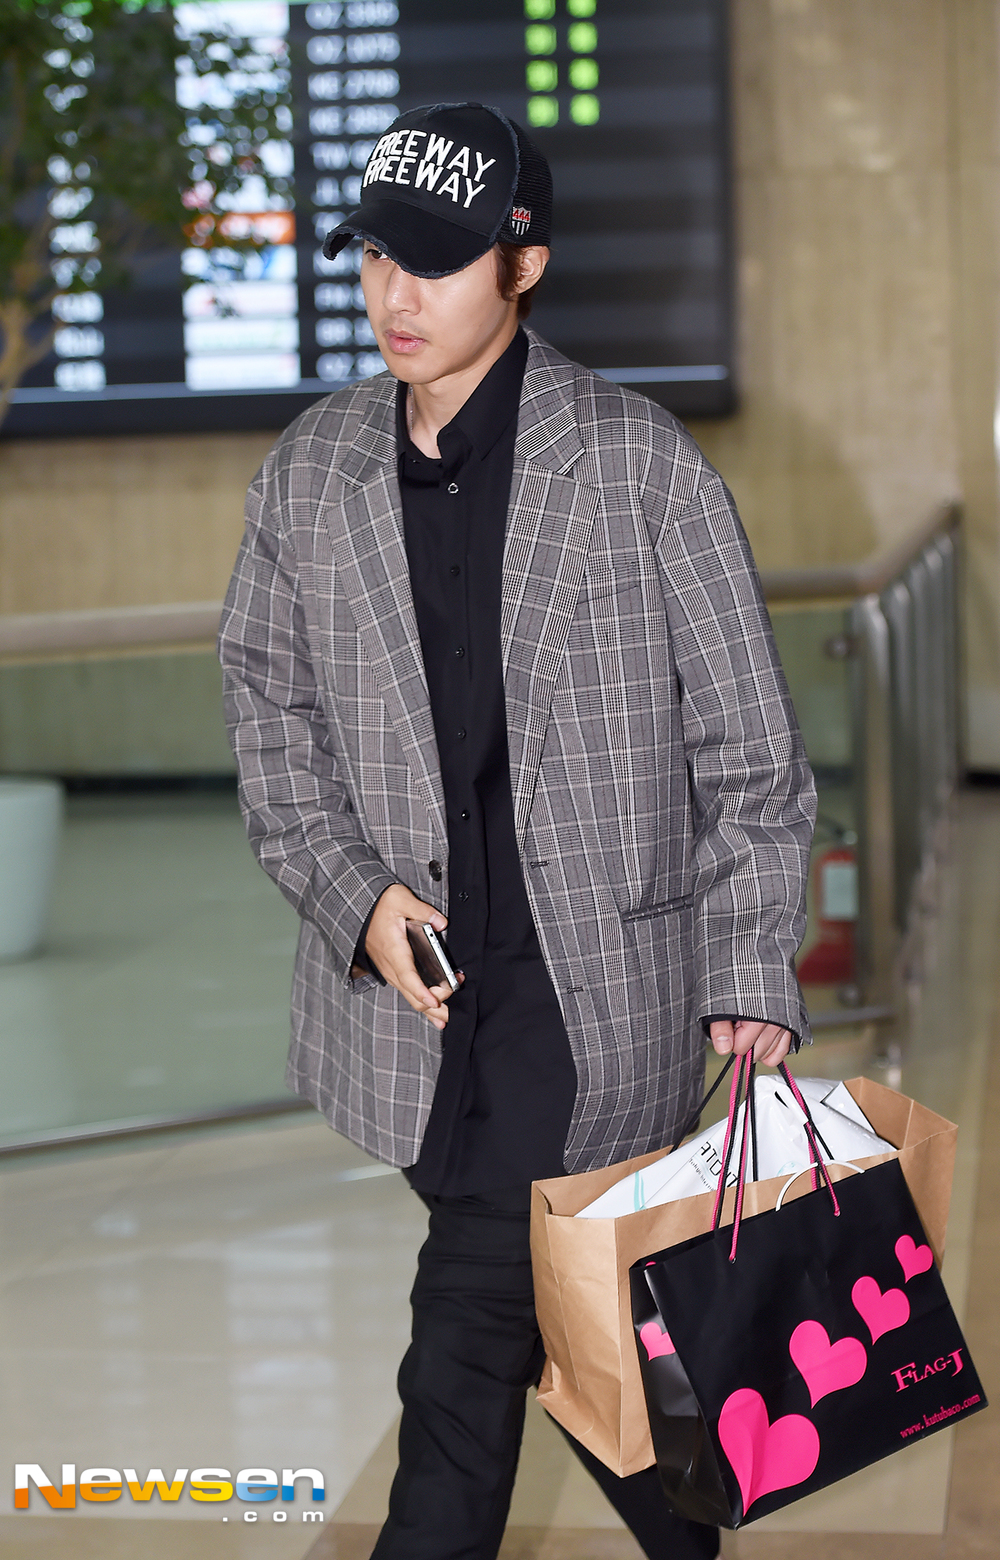 This day Kim Jeong-hyeon is passing through the immigration gate